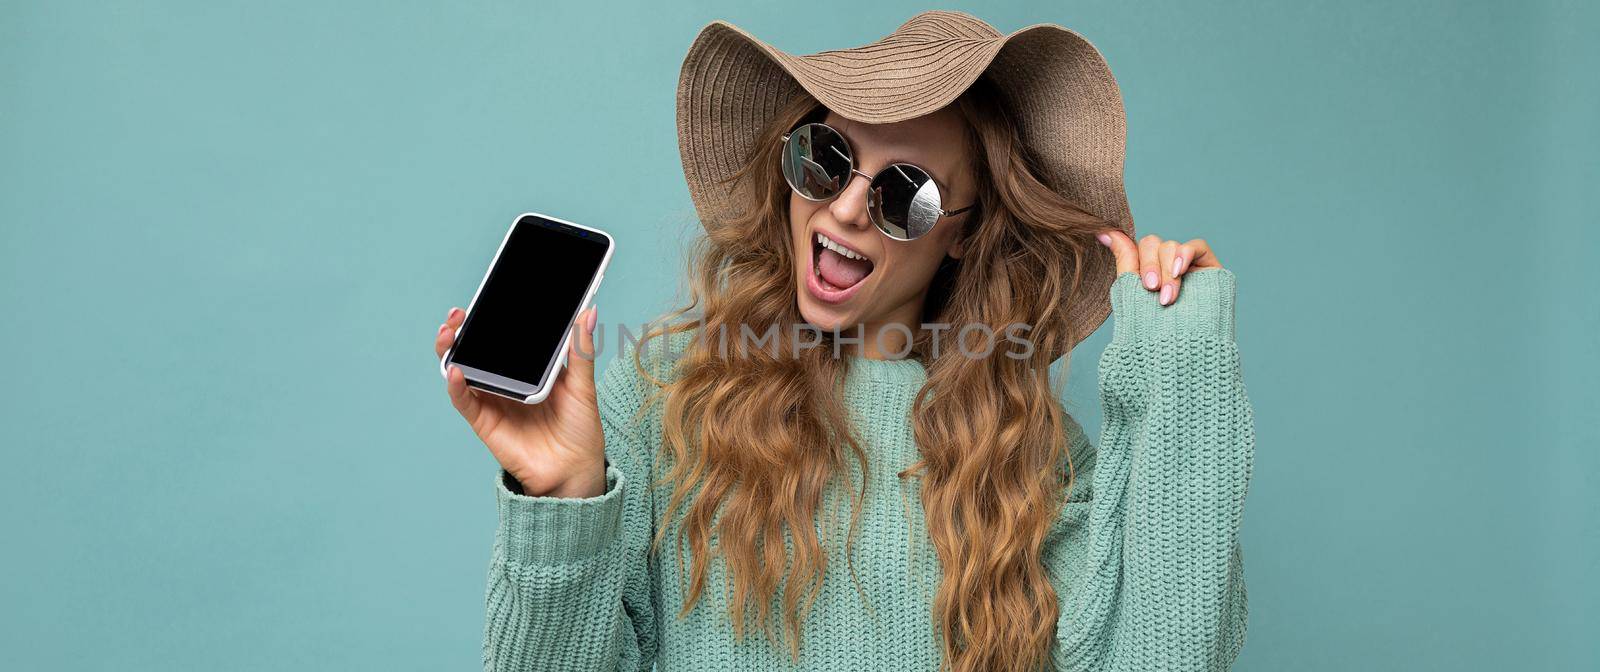 Panoramic photo of beautiful happy young blonde woman wearing sunglasses and summer hat isolated on blue background with copy space holding smartphone showing phone in hand with empty screen display looking at camera with open mouth. Mockup